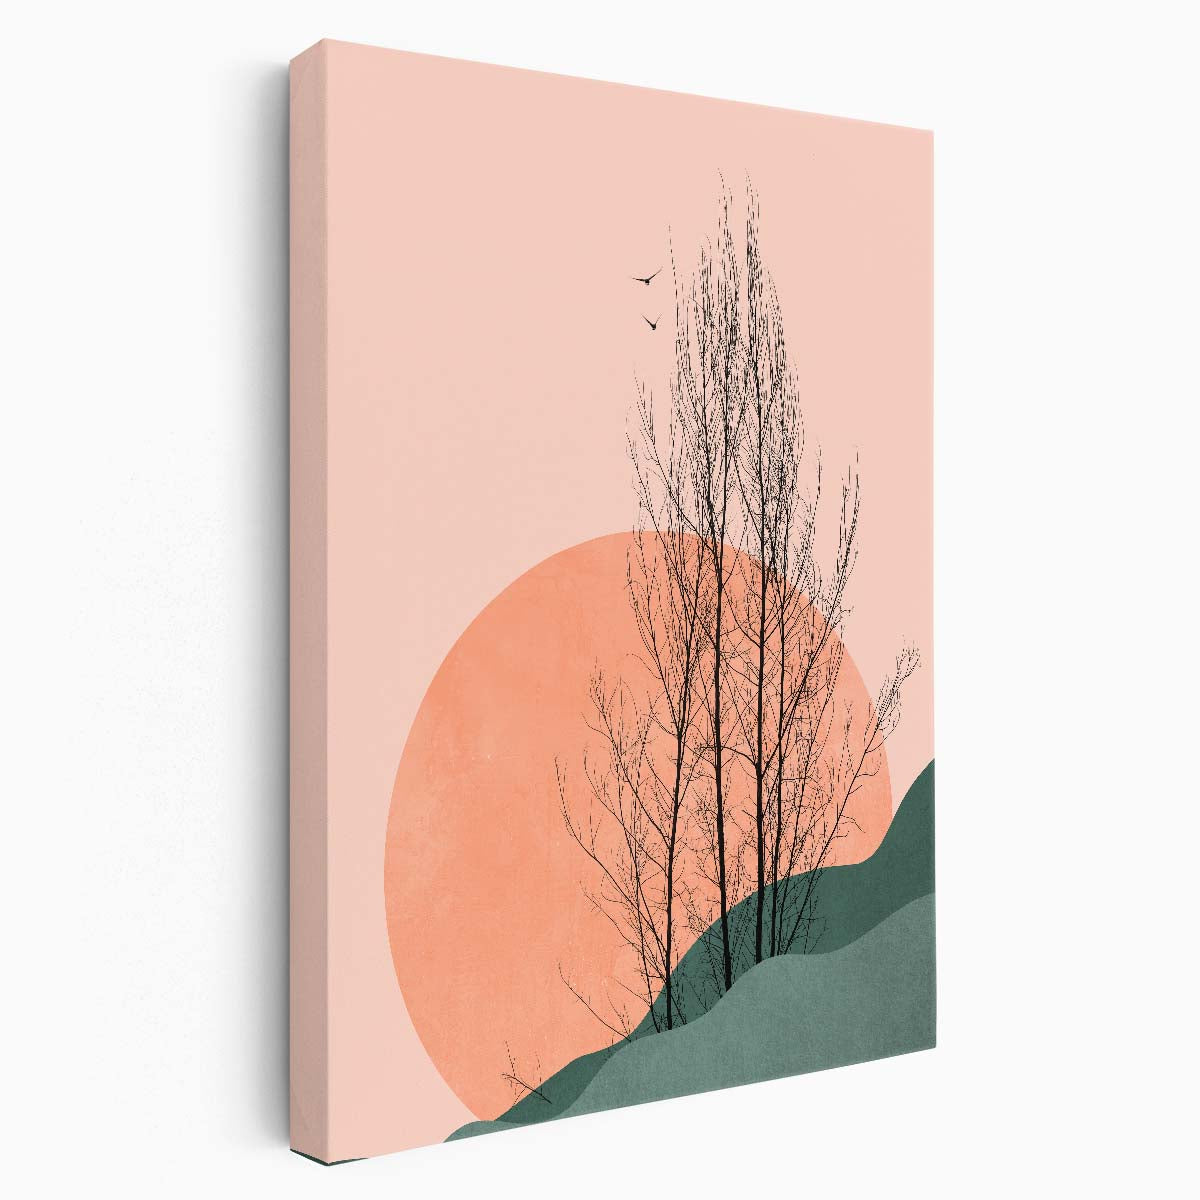 Kubistika's Tranquil Sunset Tree Branch Illustration Wall Art by Luxuriance Designs, made in USA